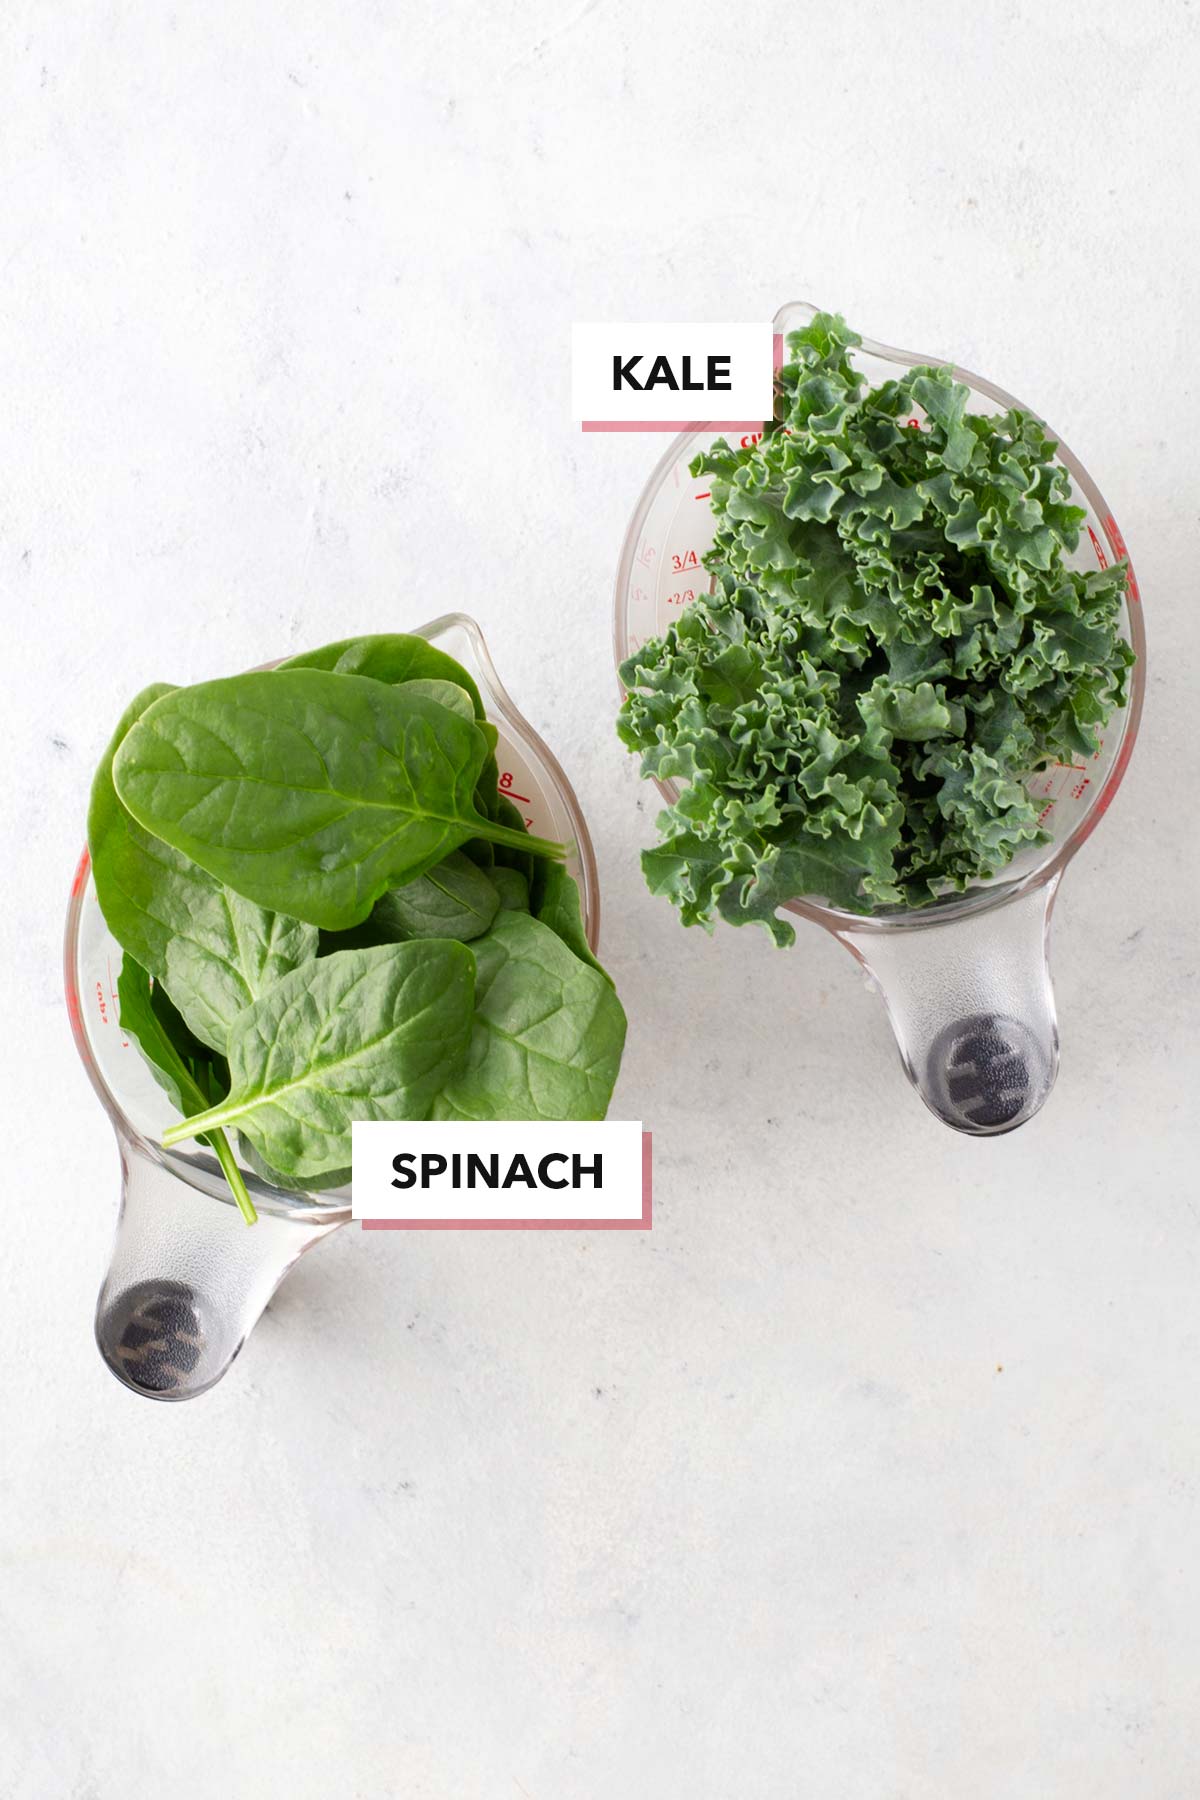 Leafy greens for a basic smoothie recipe.